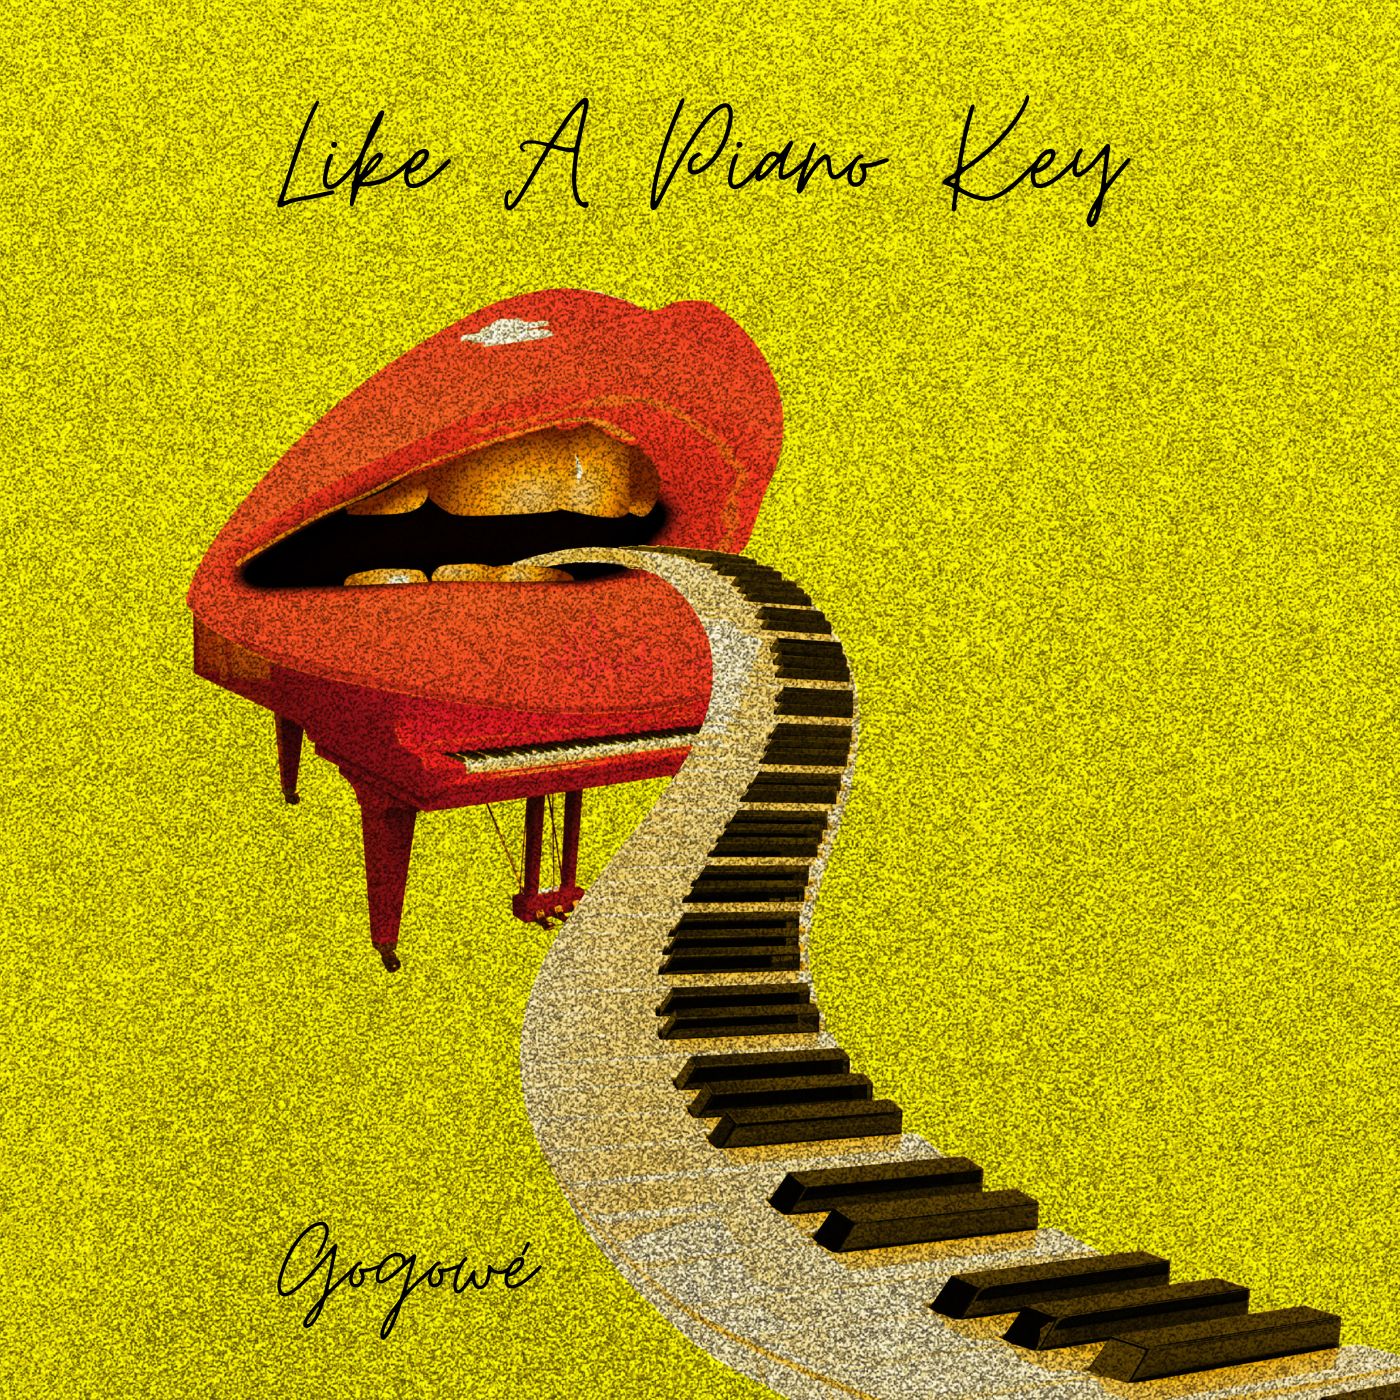 GOGOWÉ's latest song LIKE A PIANO KEY cover art